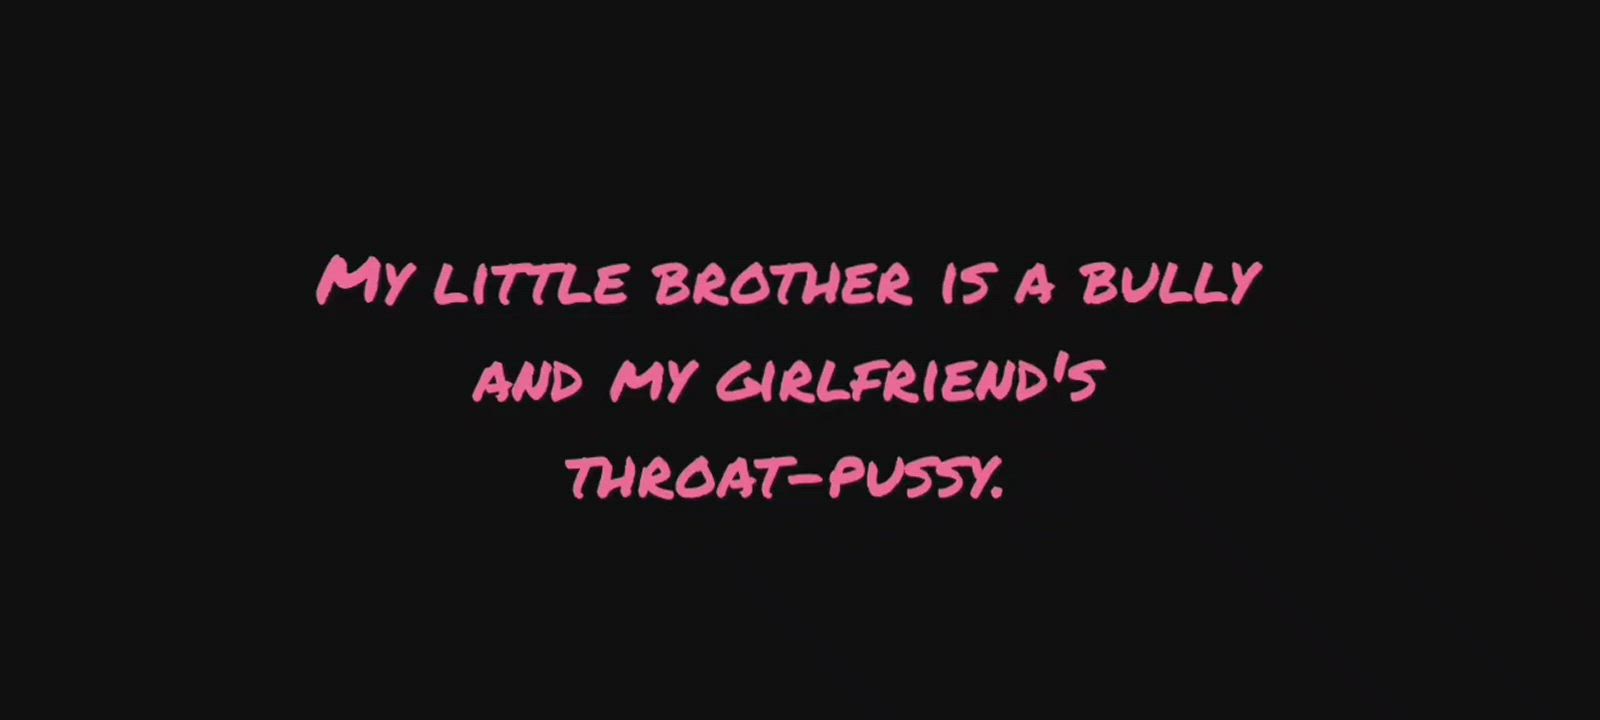 Younger brother and my girlfriend Throat-pussy